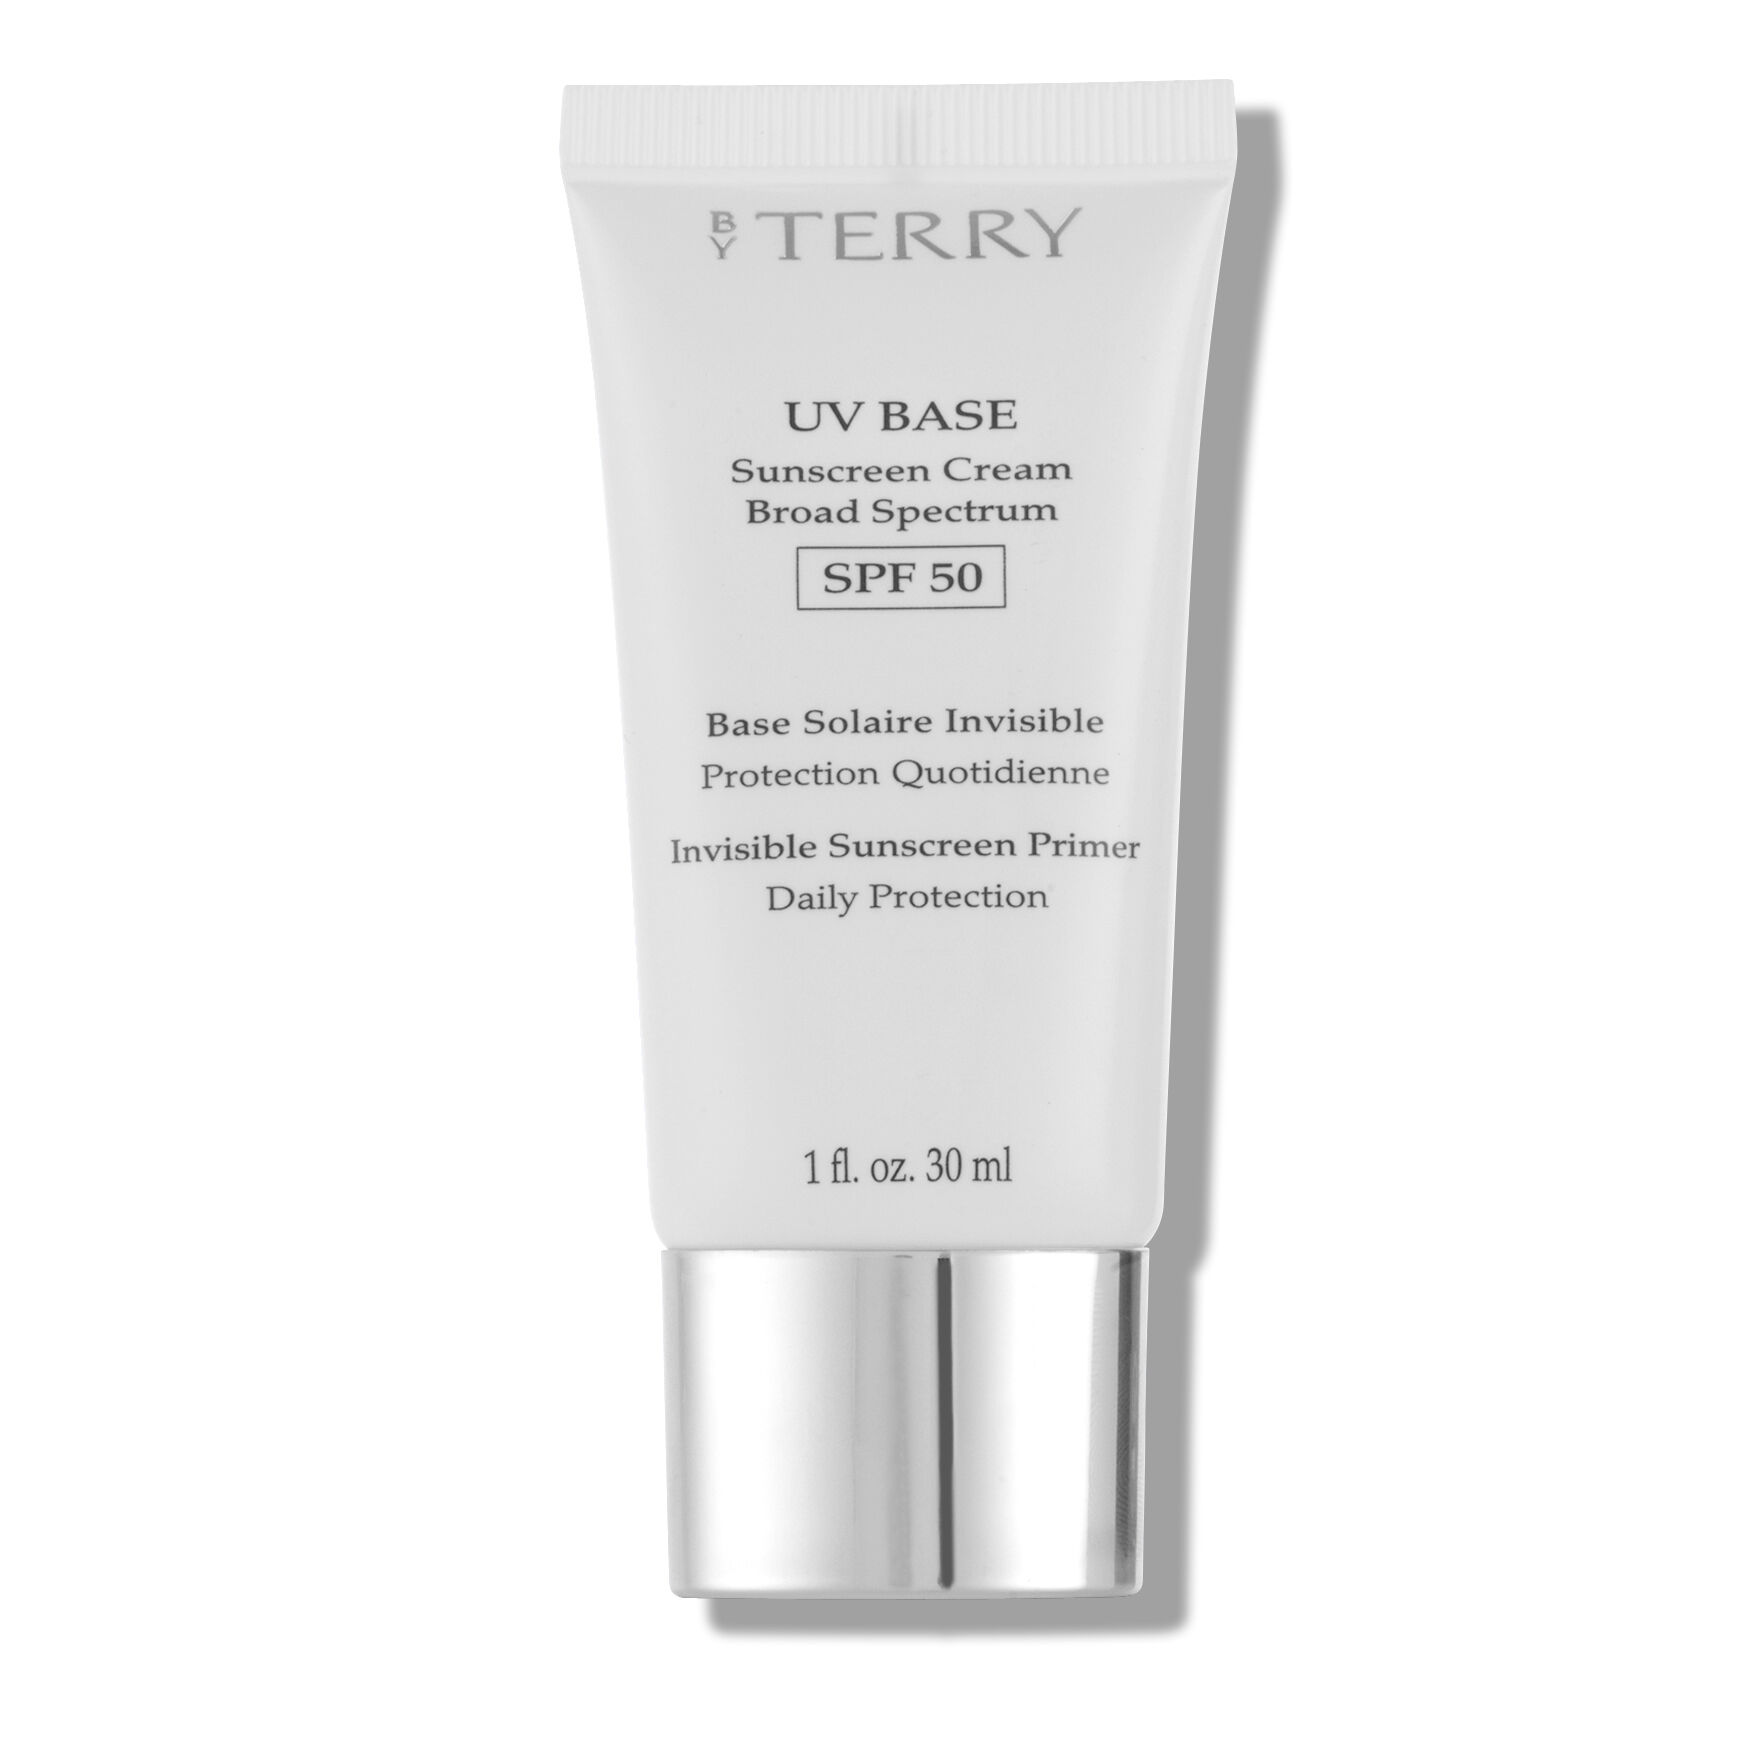 By Terry Uv Base Sunscreen Cream Broad Spectrum Spf50 Space Nk